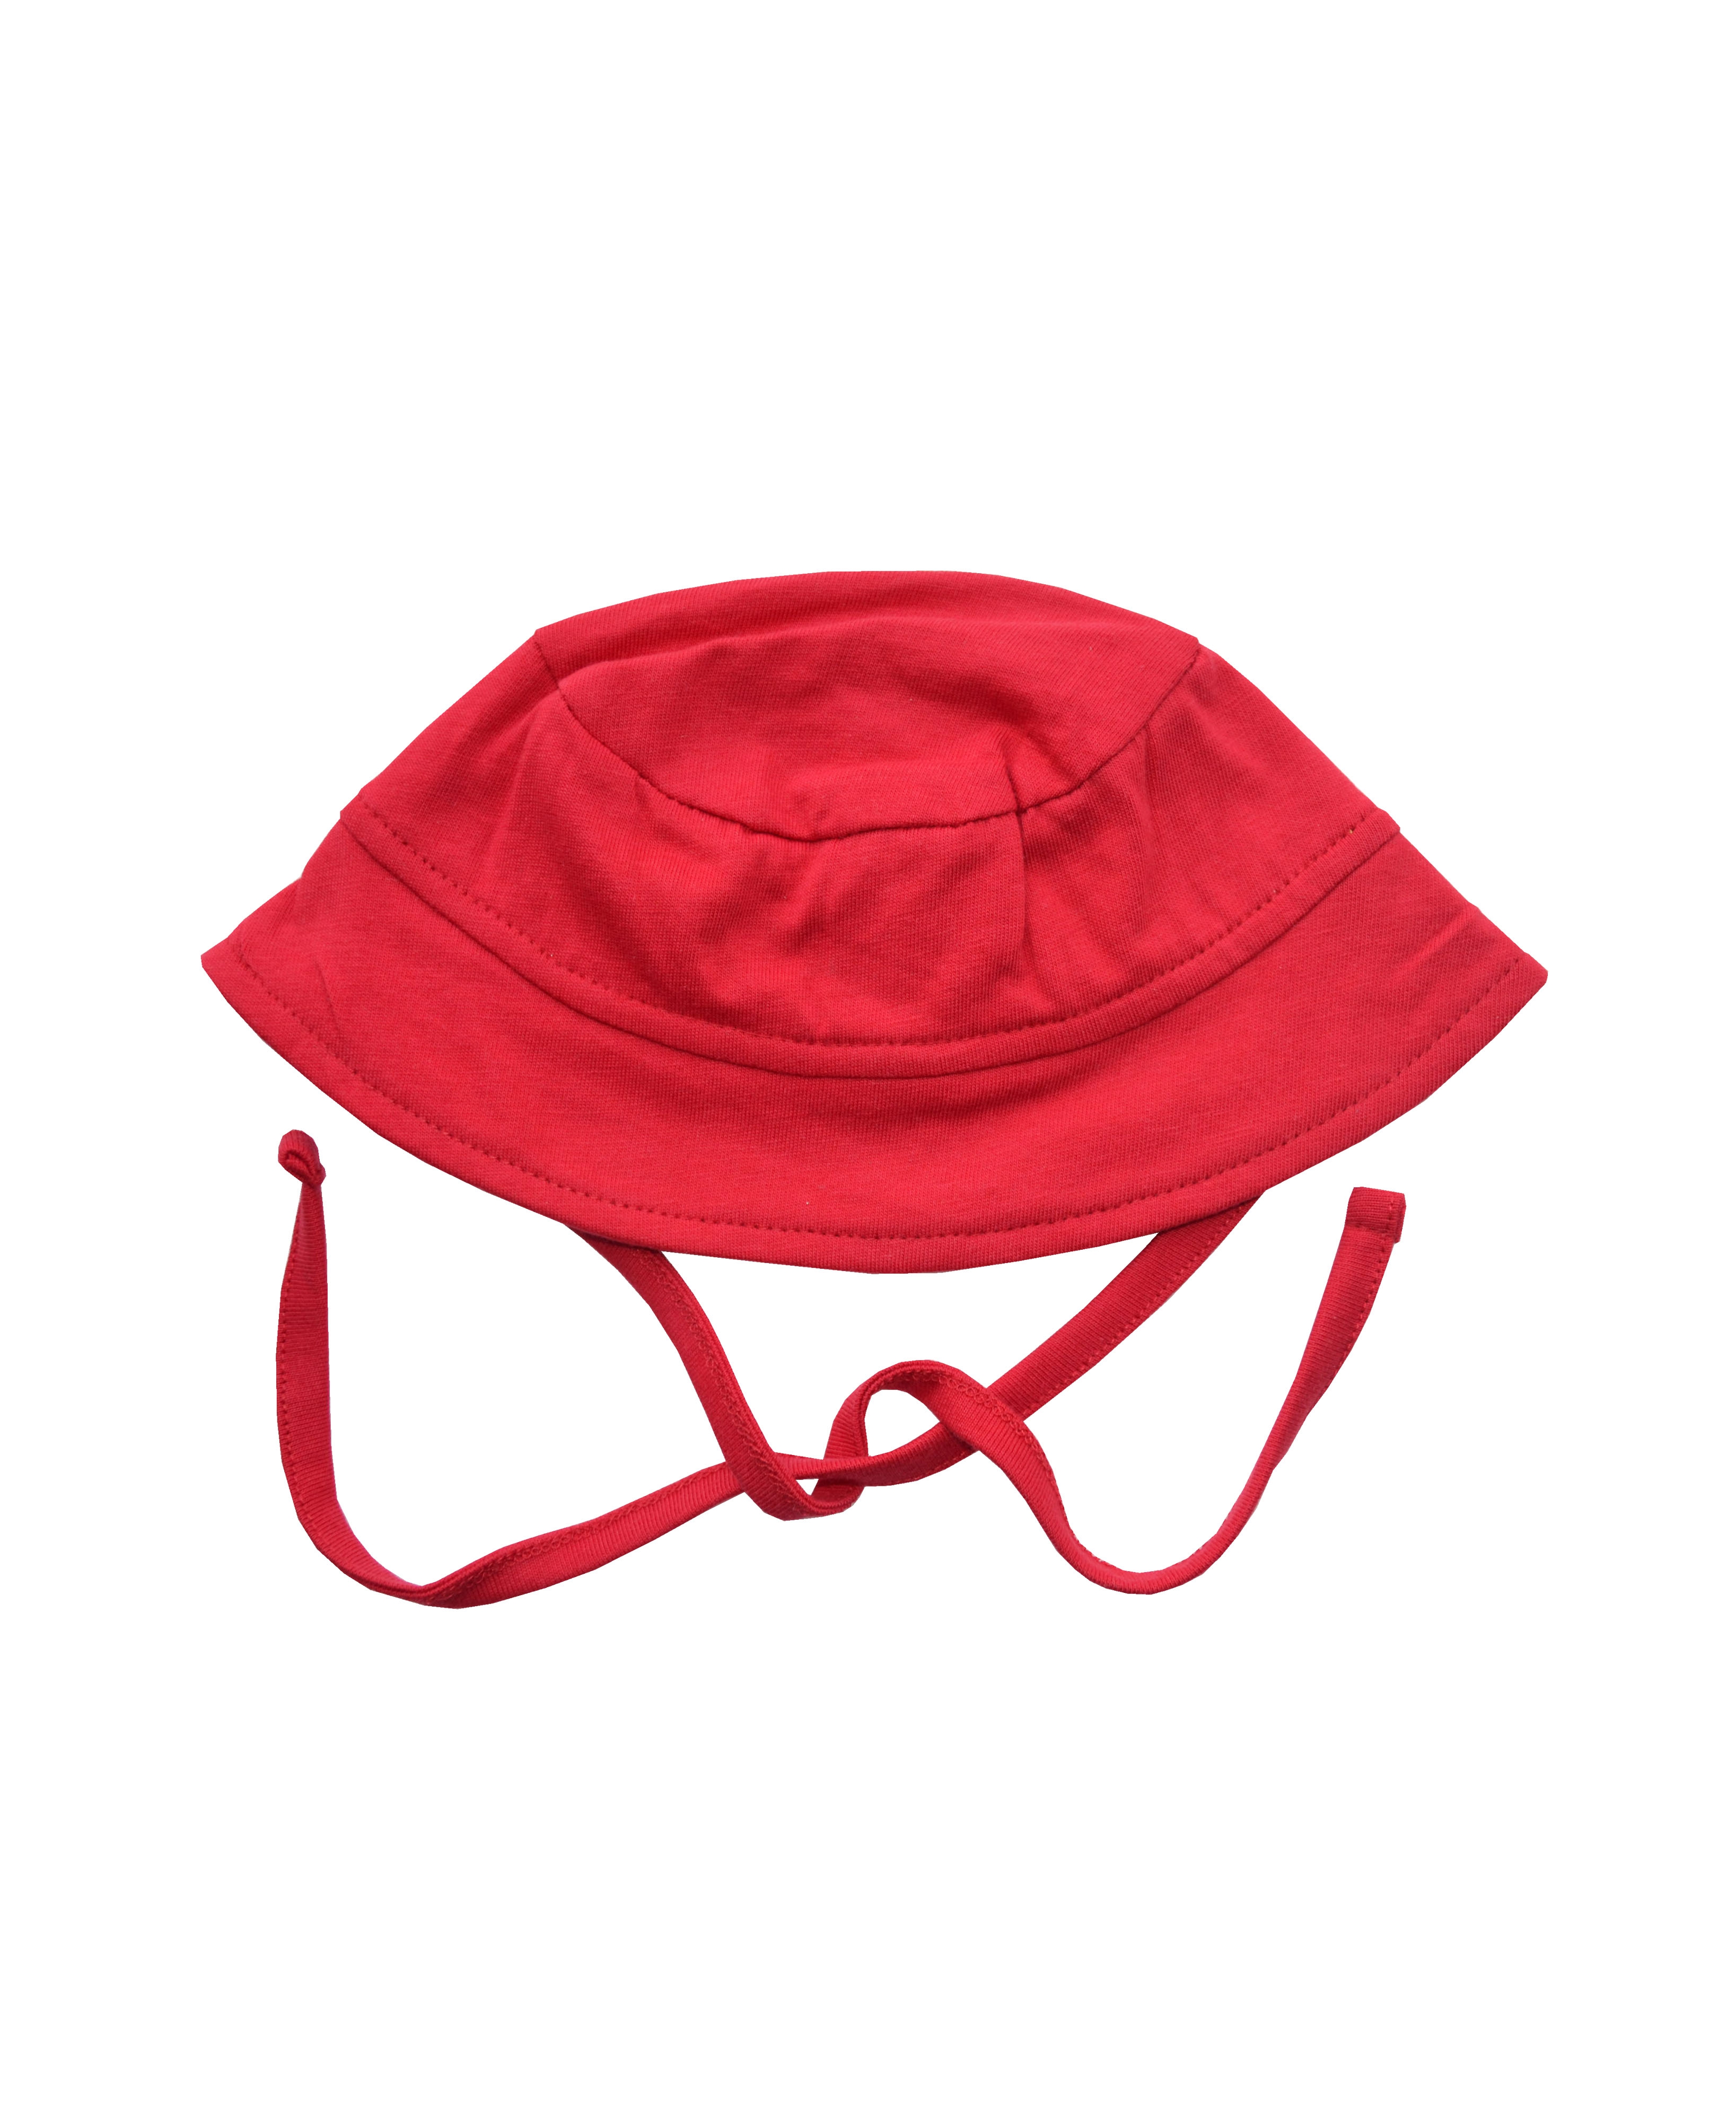 Babeez | Red Sunhat (100% Cotton Single Jersey) undefined